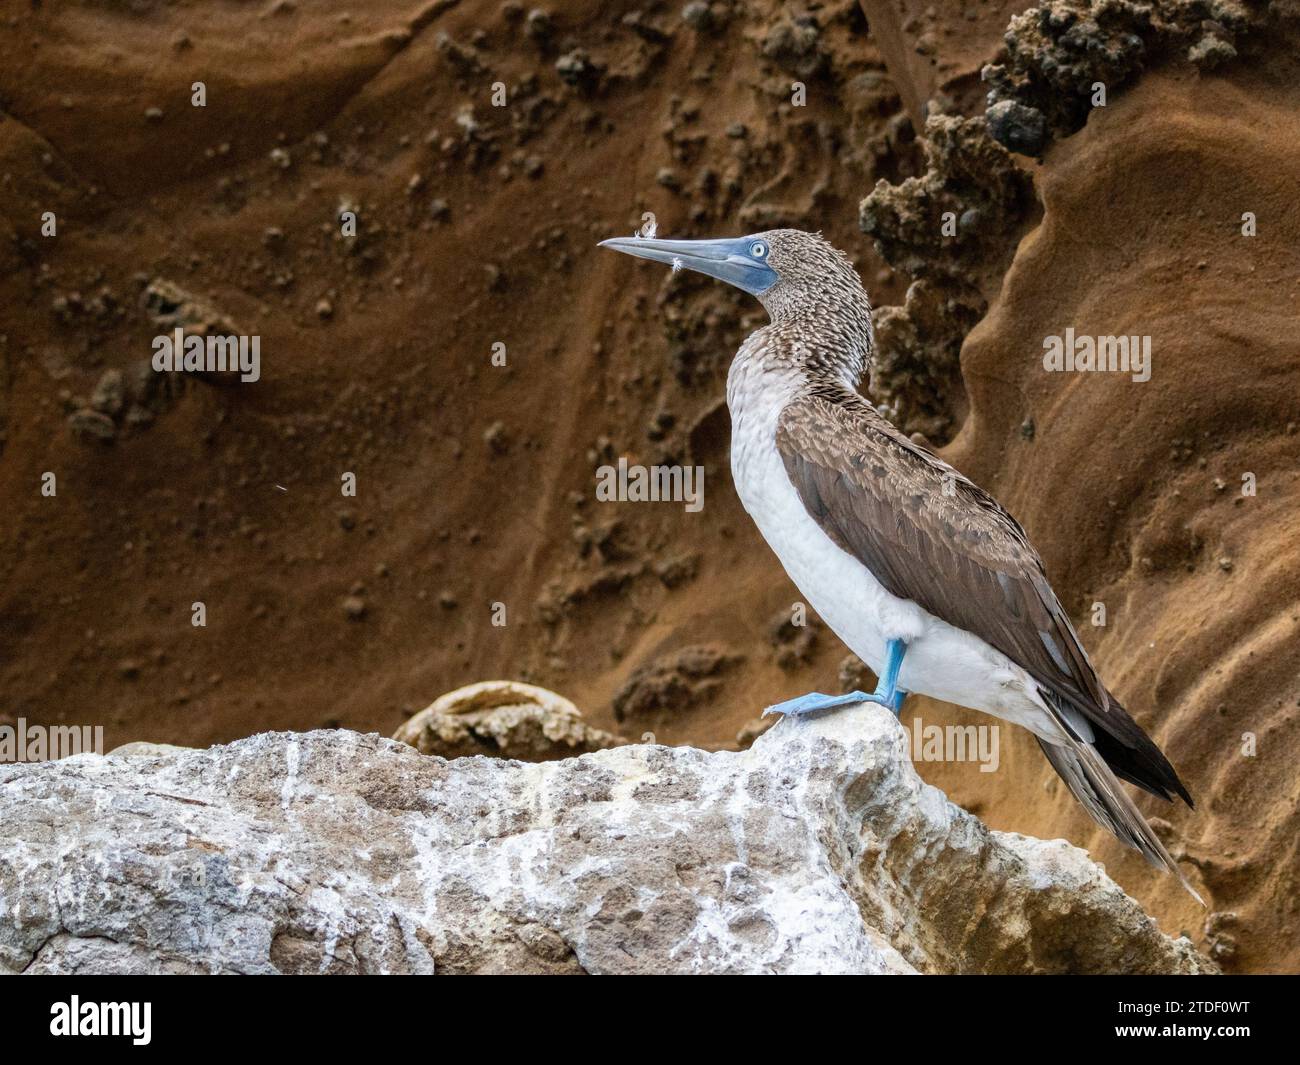 Adult blue-footed booby (Sula nebouxii) on rocky outcropping on Isabela Island, Galapagos Islands, UNESCO World Heritage Site, Ecuador, South America Stock Photo